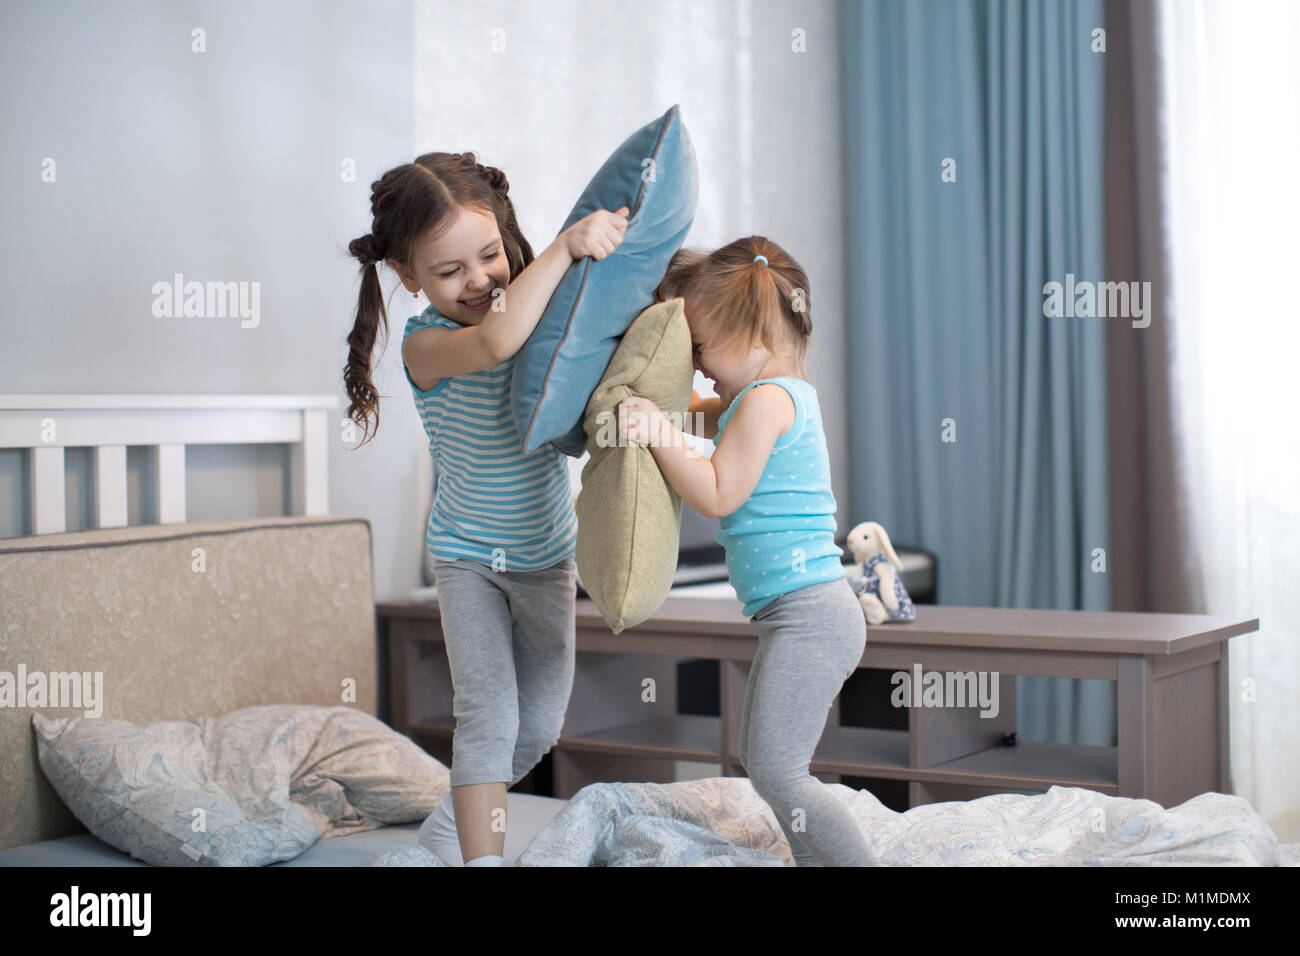 Two kids sisters girls playing with pillows at home Stock Photo